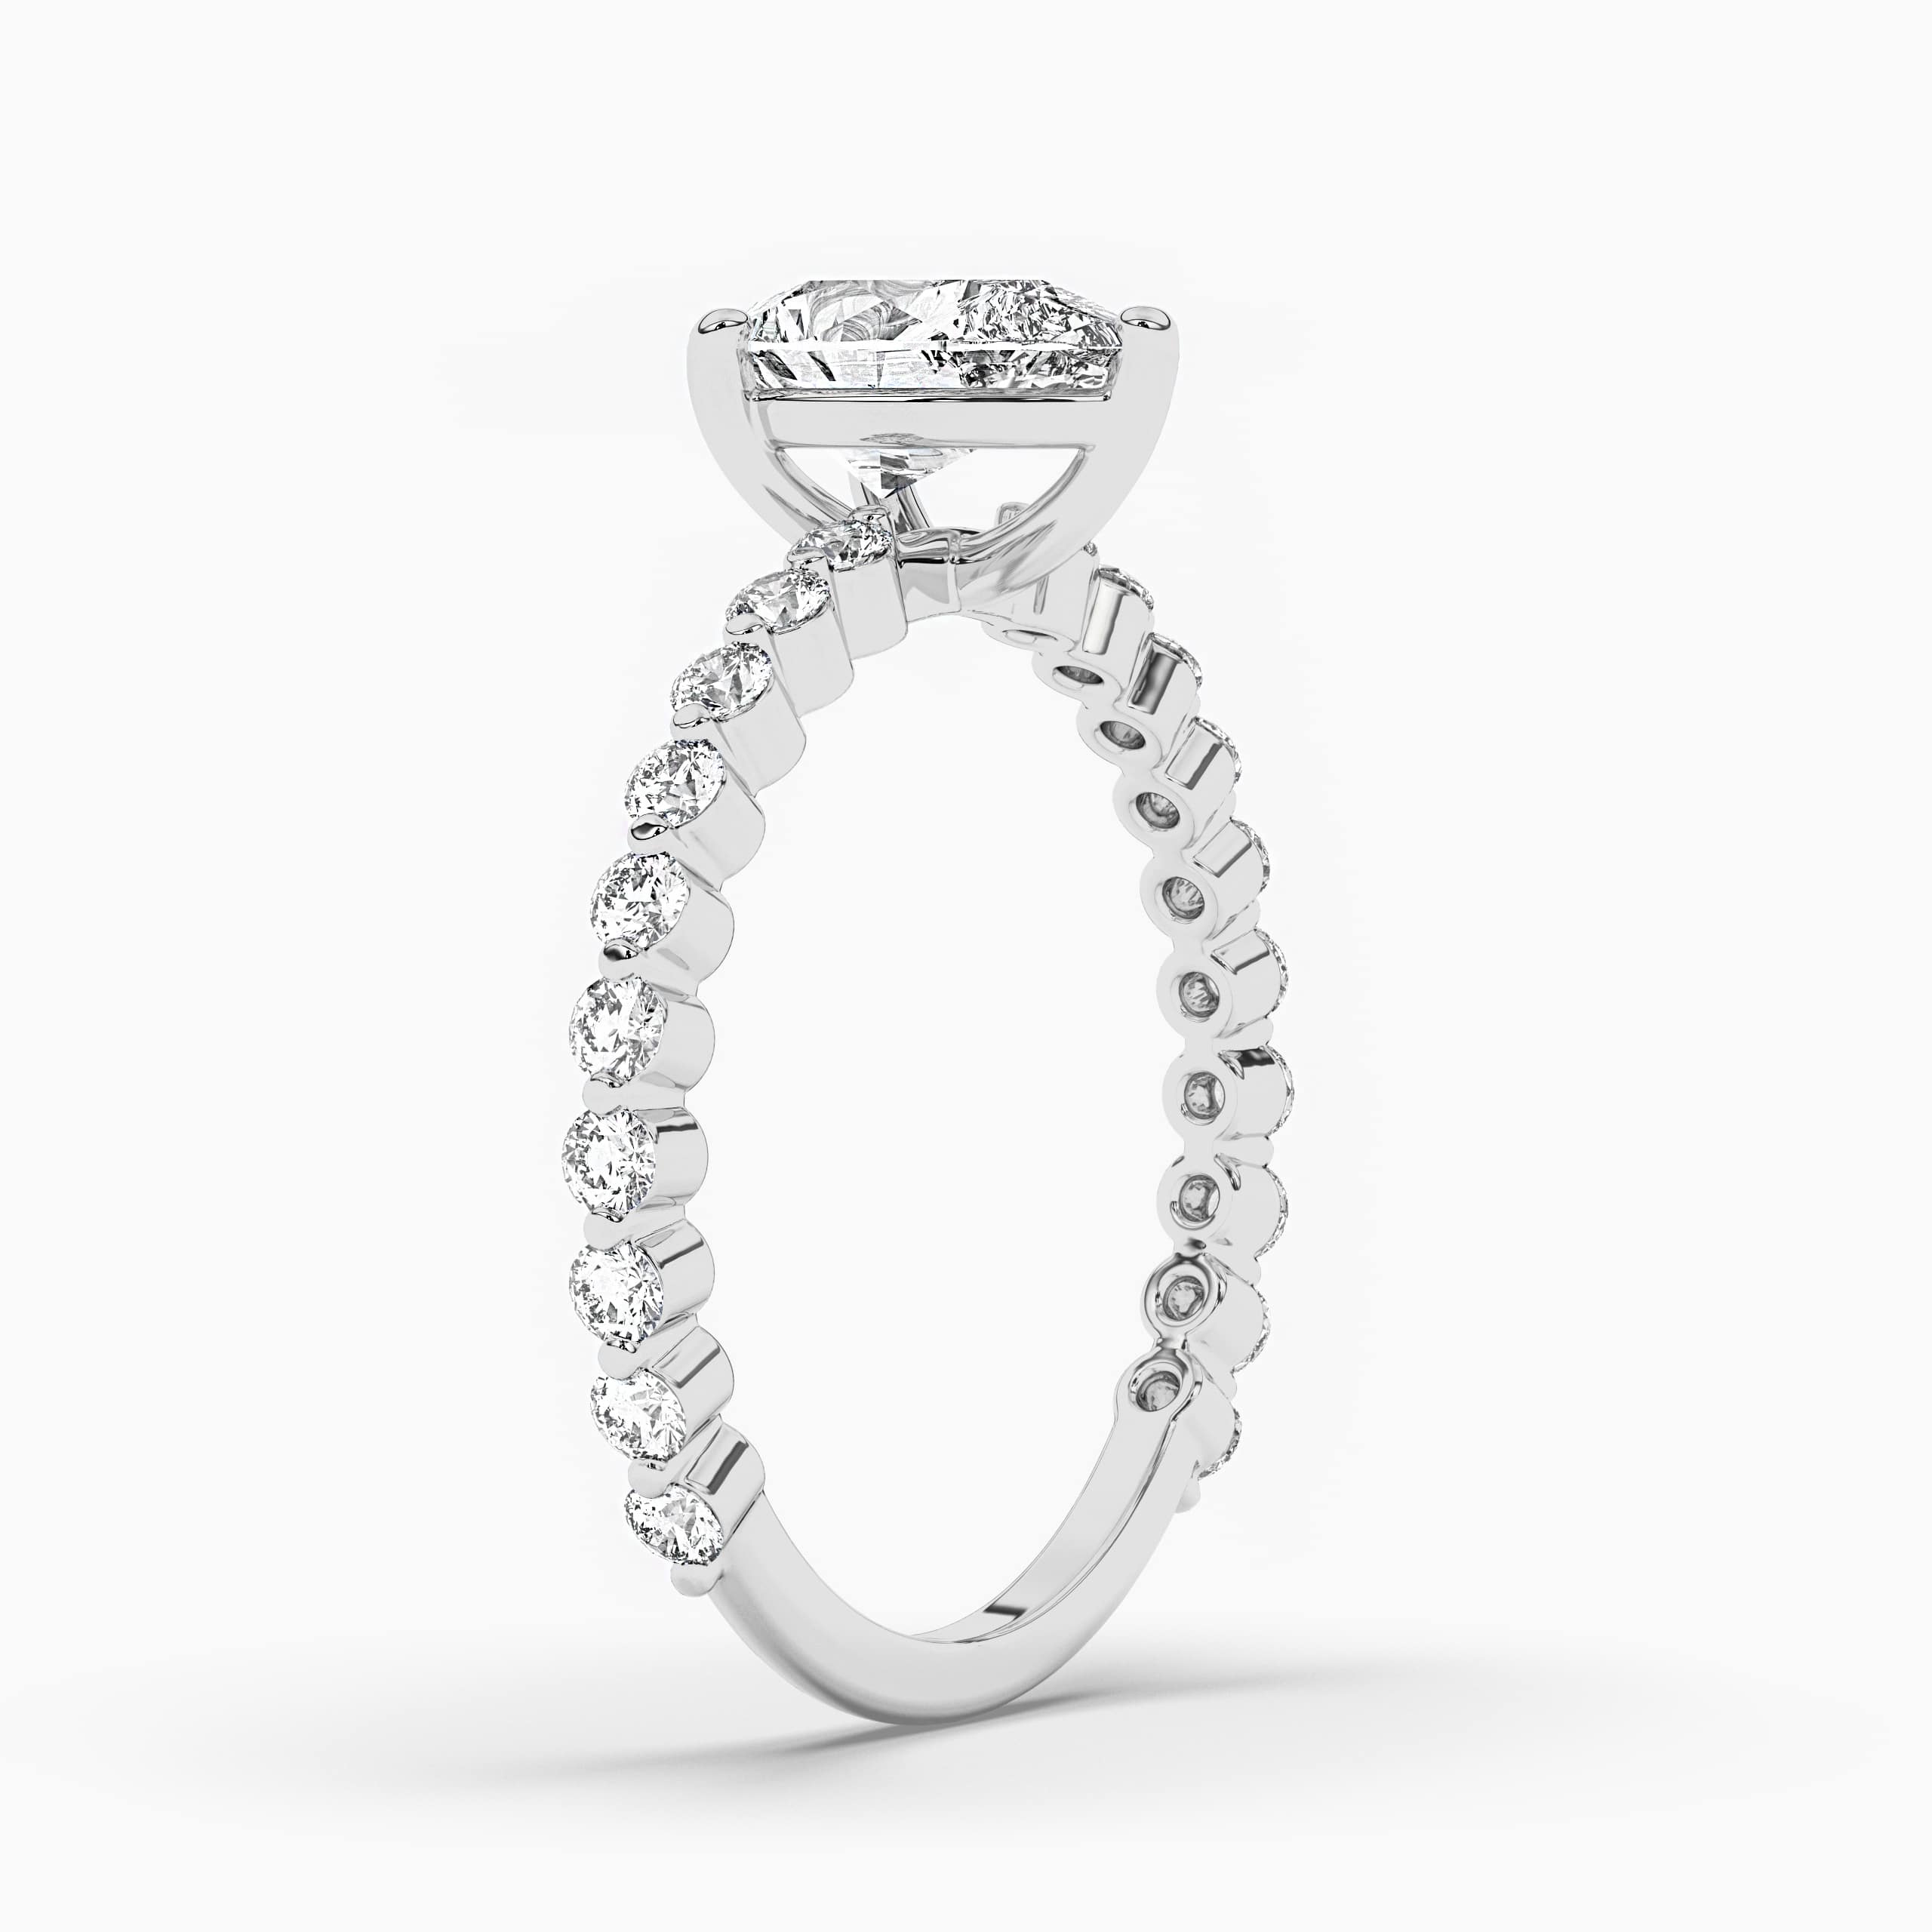 Natural Pear Cut Diamond Solitaire Engagement Ring White Gold 